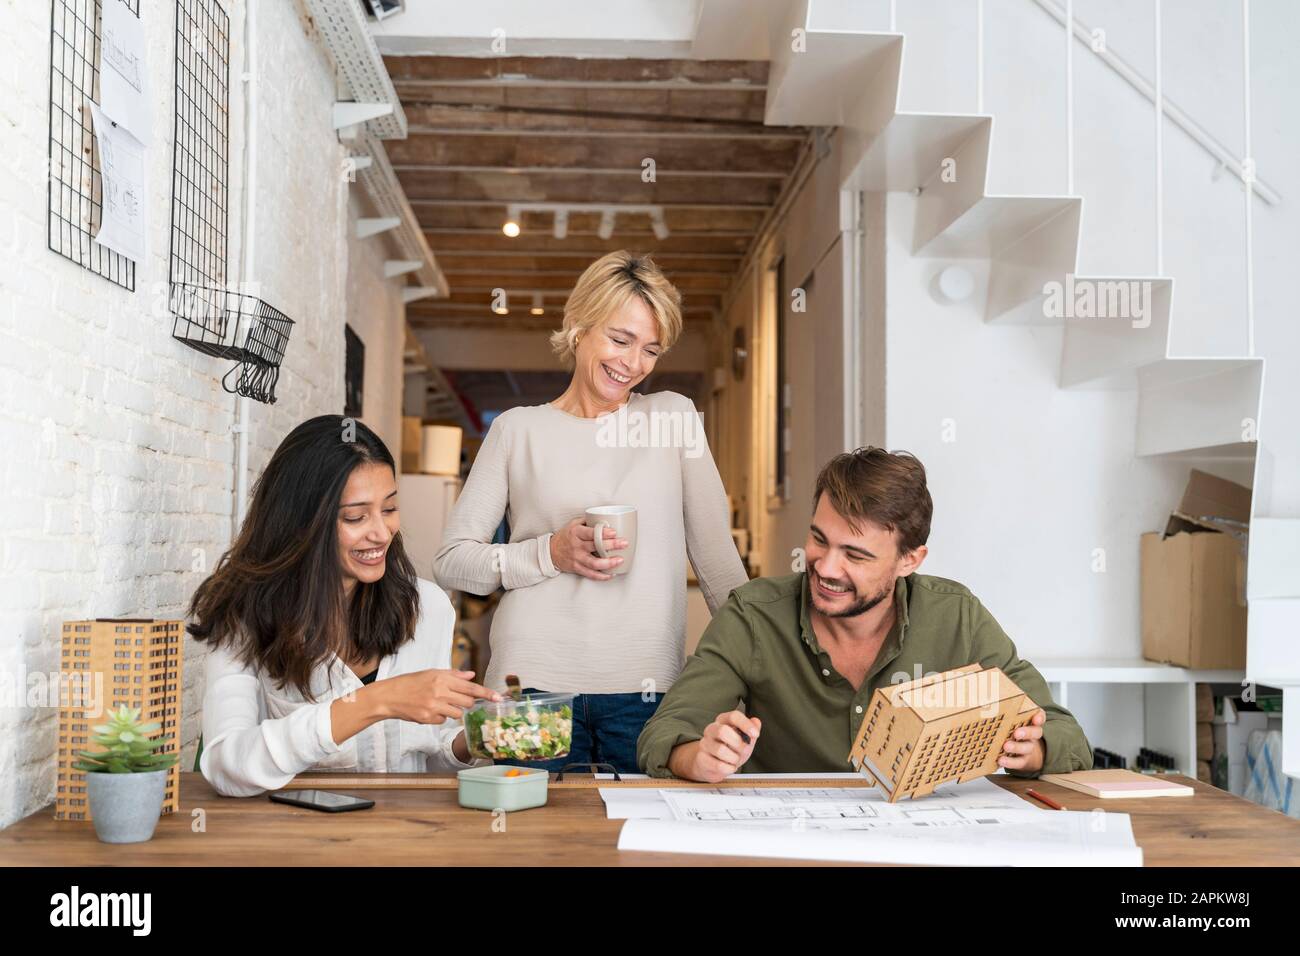 Three colleagues at desk in architect's office Stock Photo